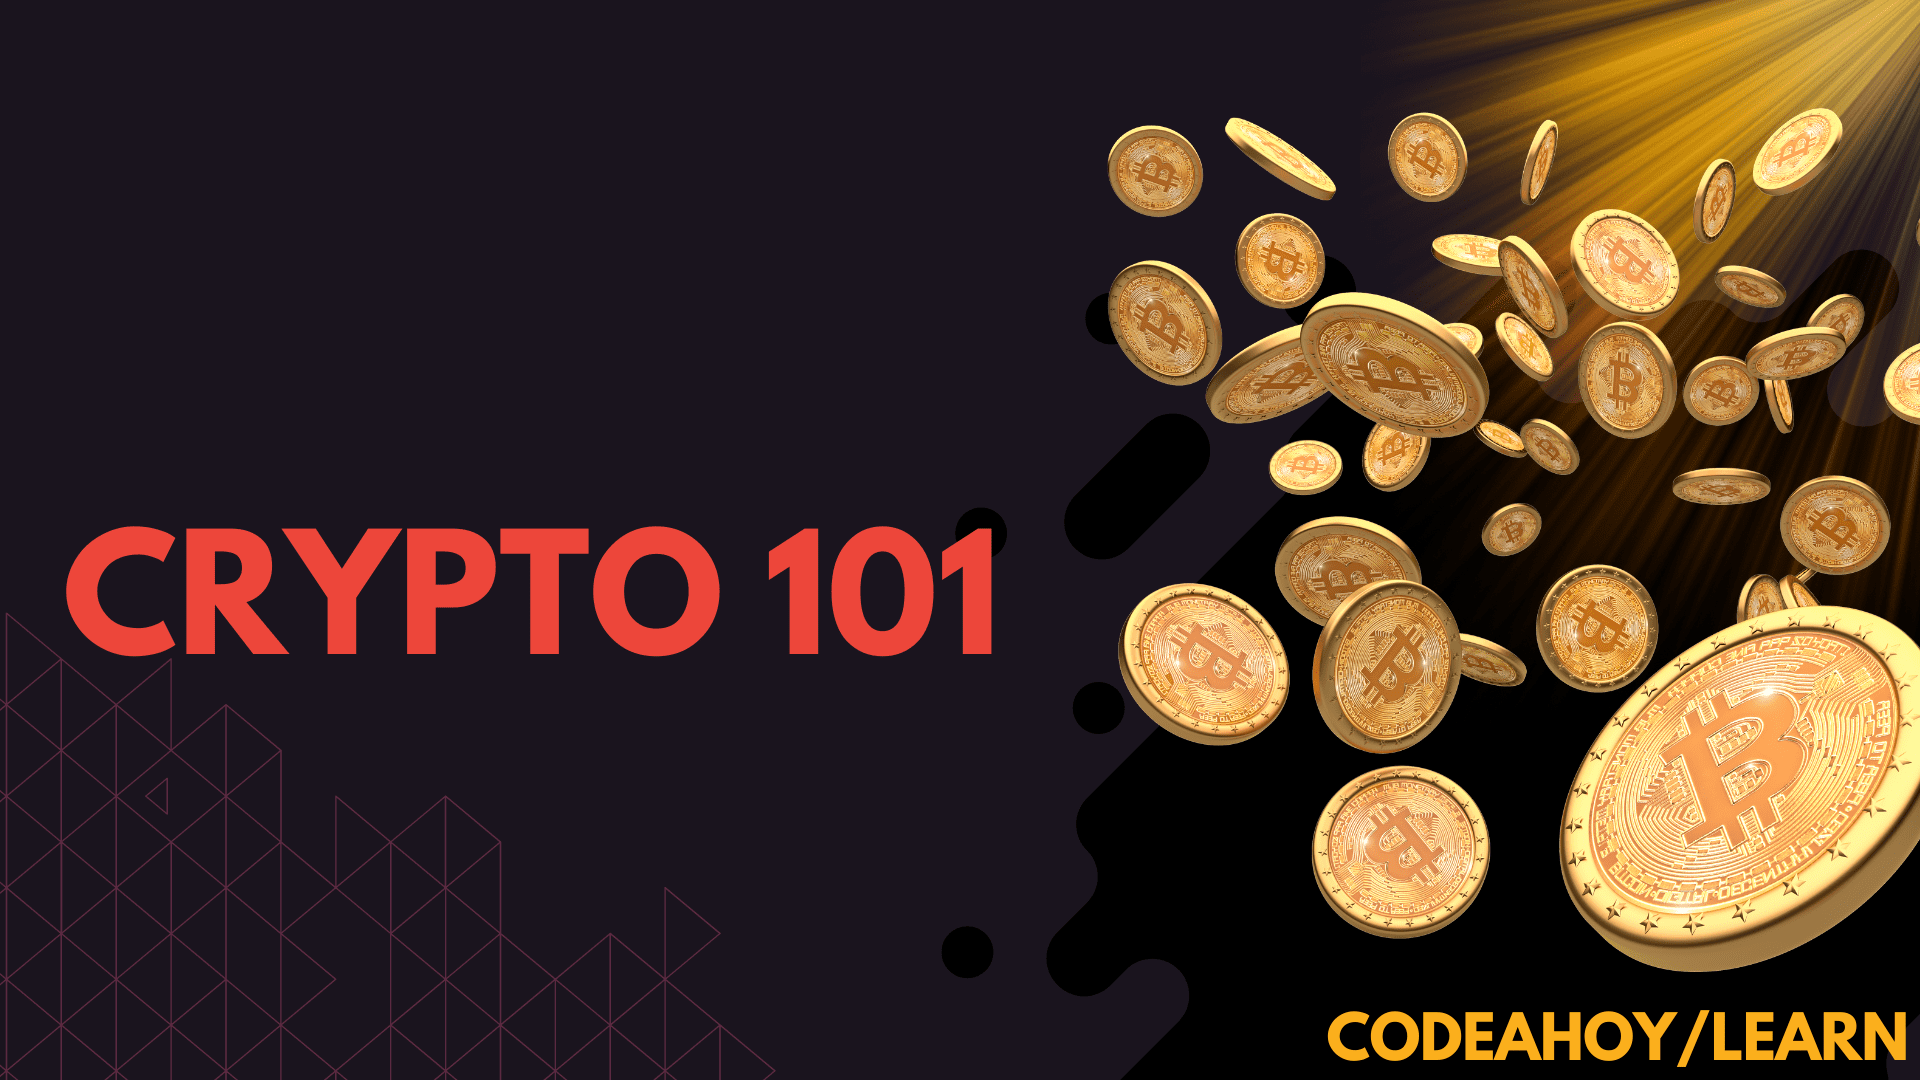 Crypto 101, the introductory book on cryptography.